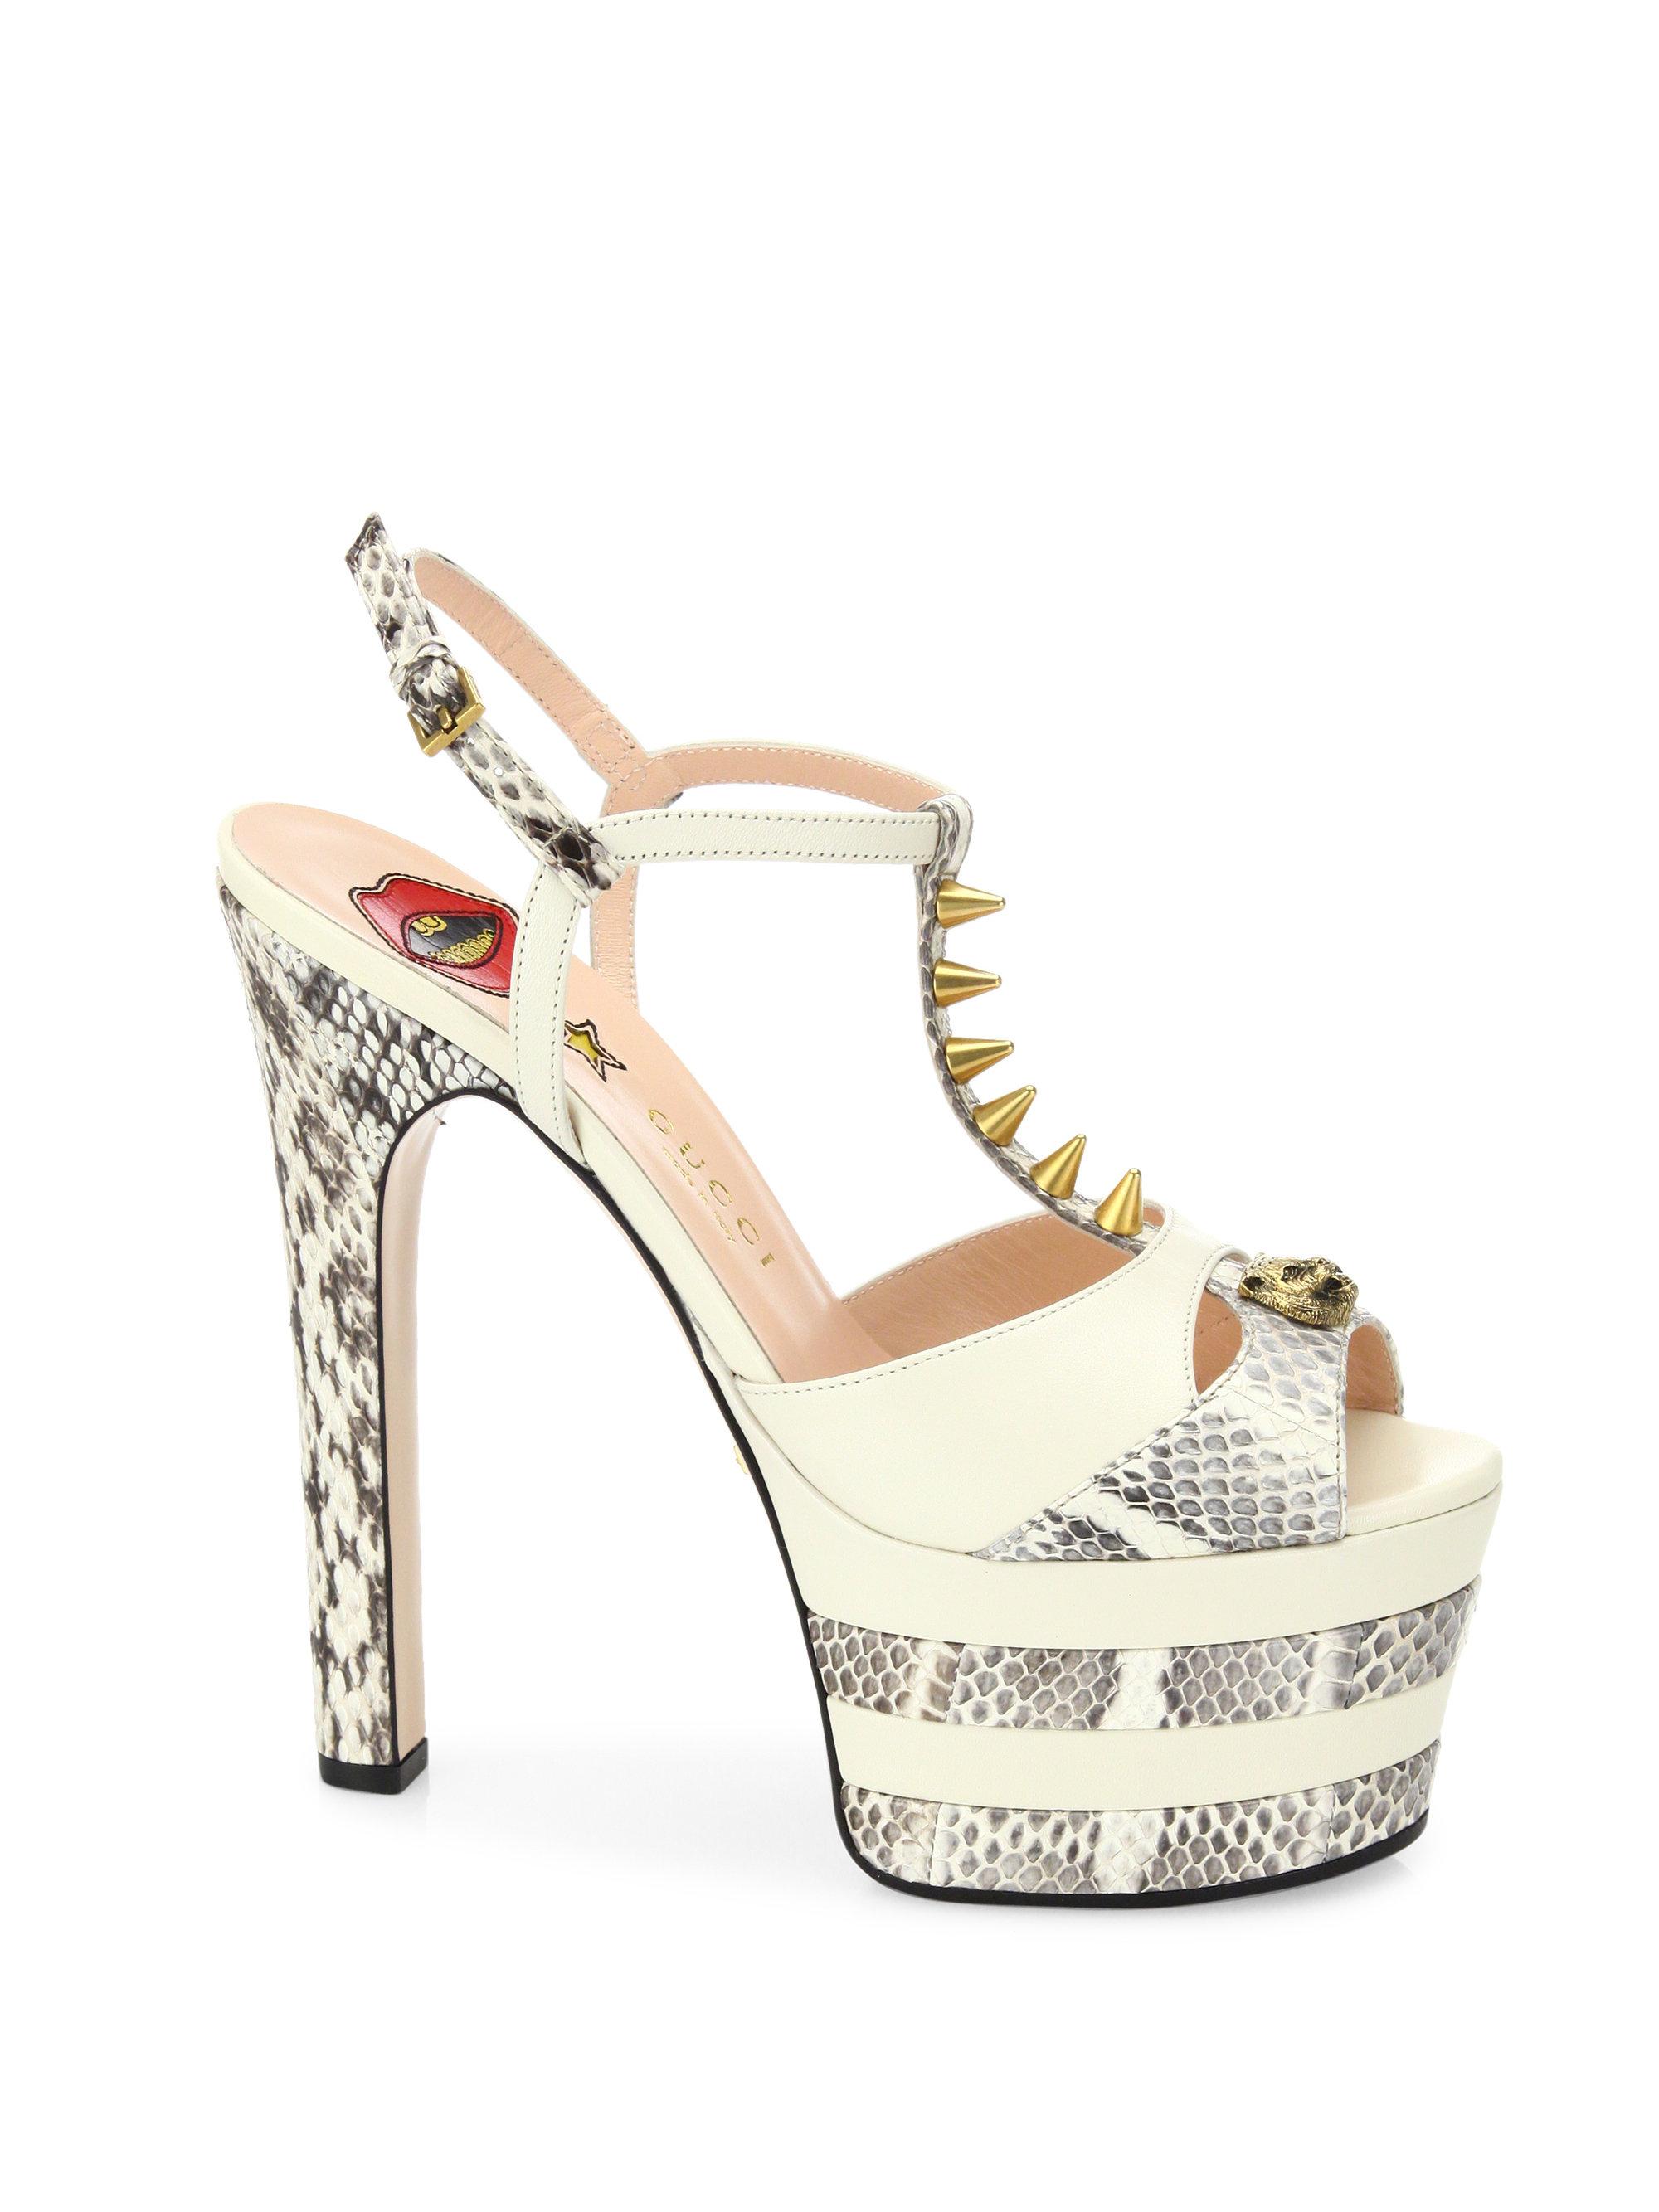 Gucci Angel Leather & Snakeskin Peep Toe Platform T-strap Sandals in White  | Lyst